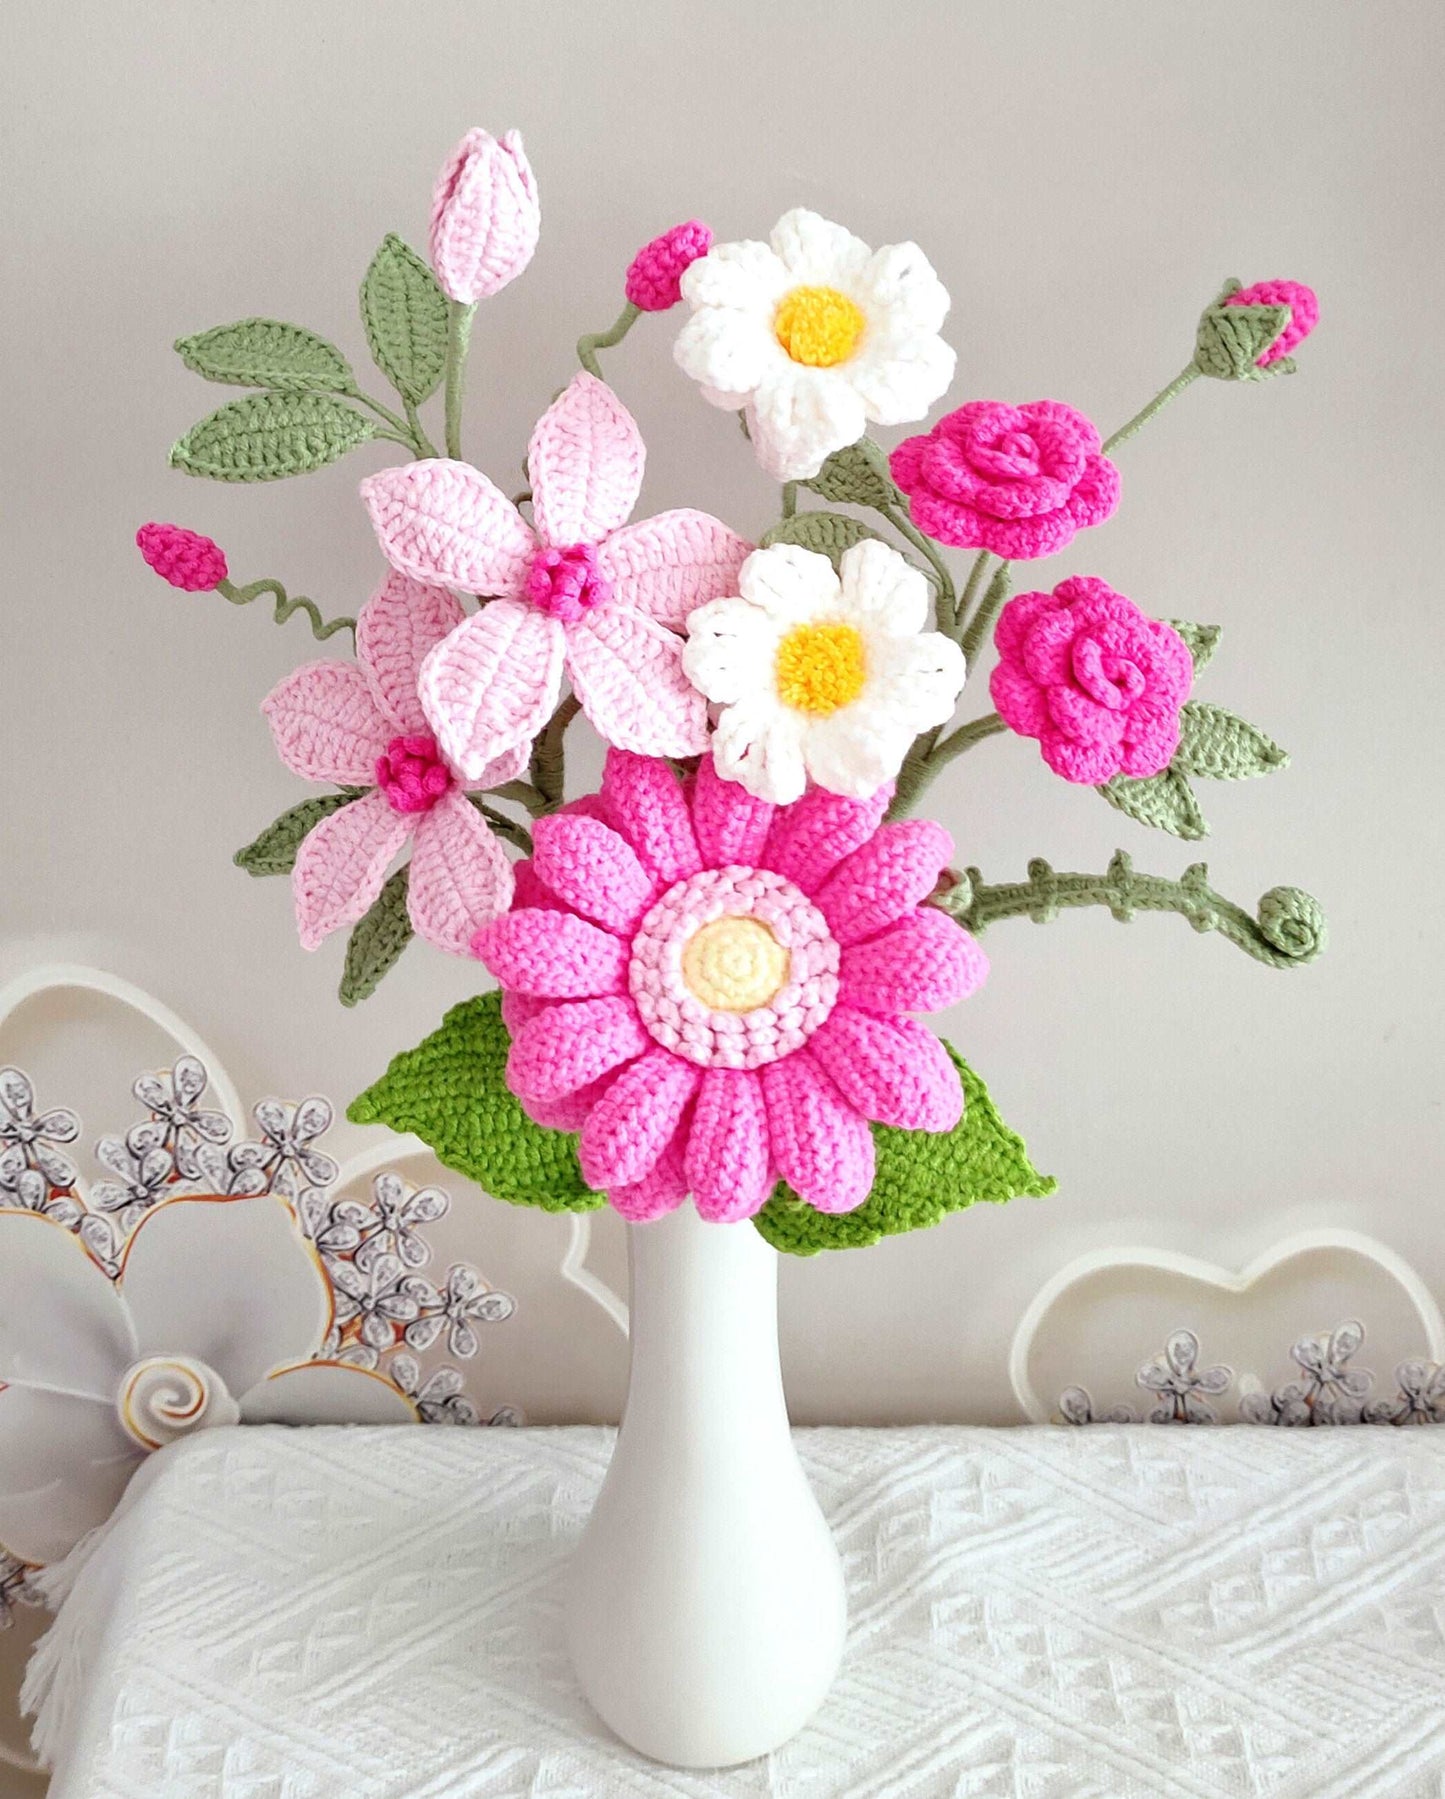 Crocheted Pink Flower Cluster Creation for Home Décor Enthusiasts